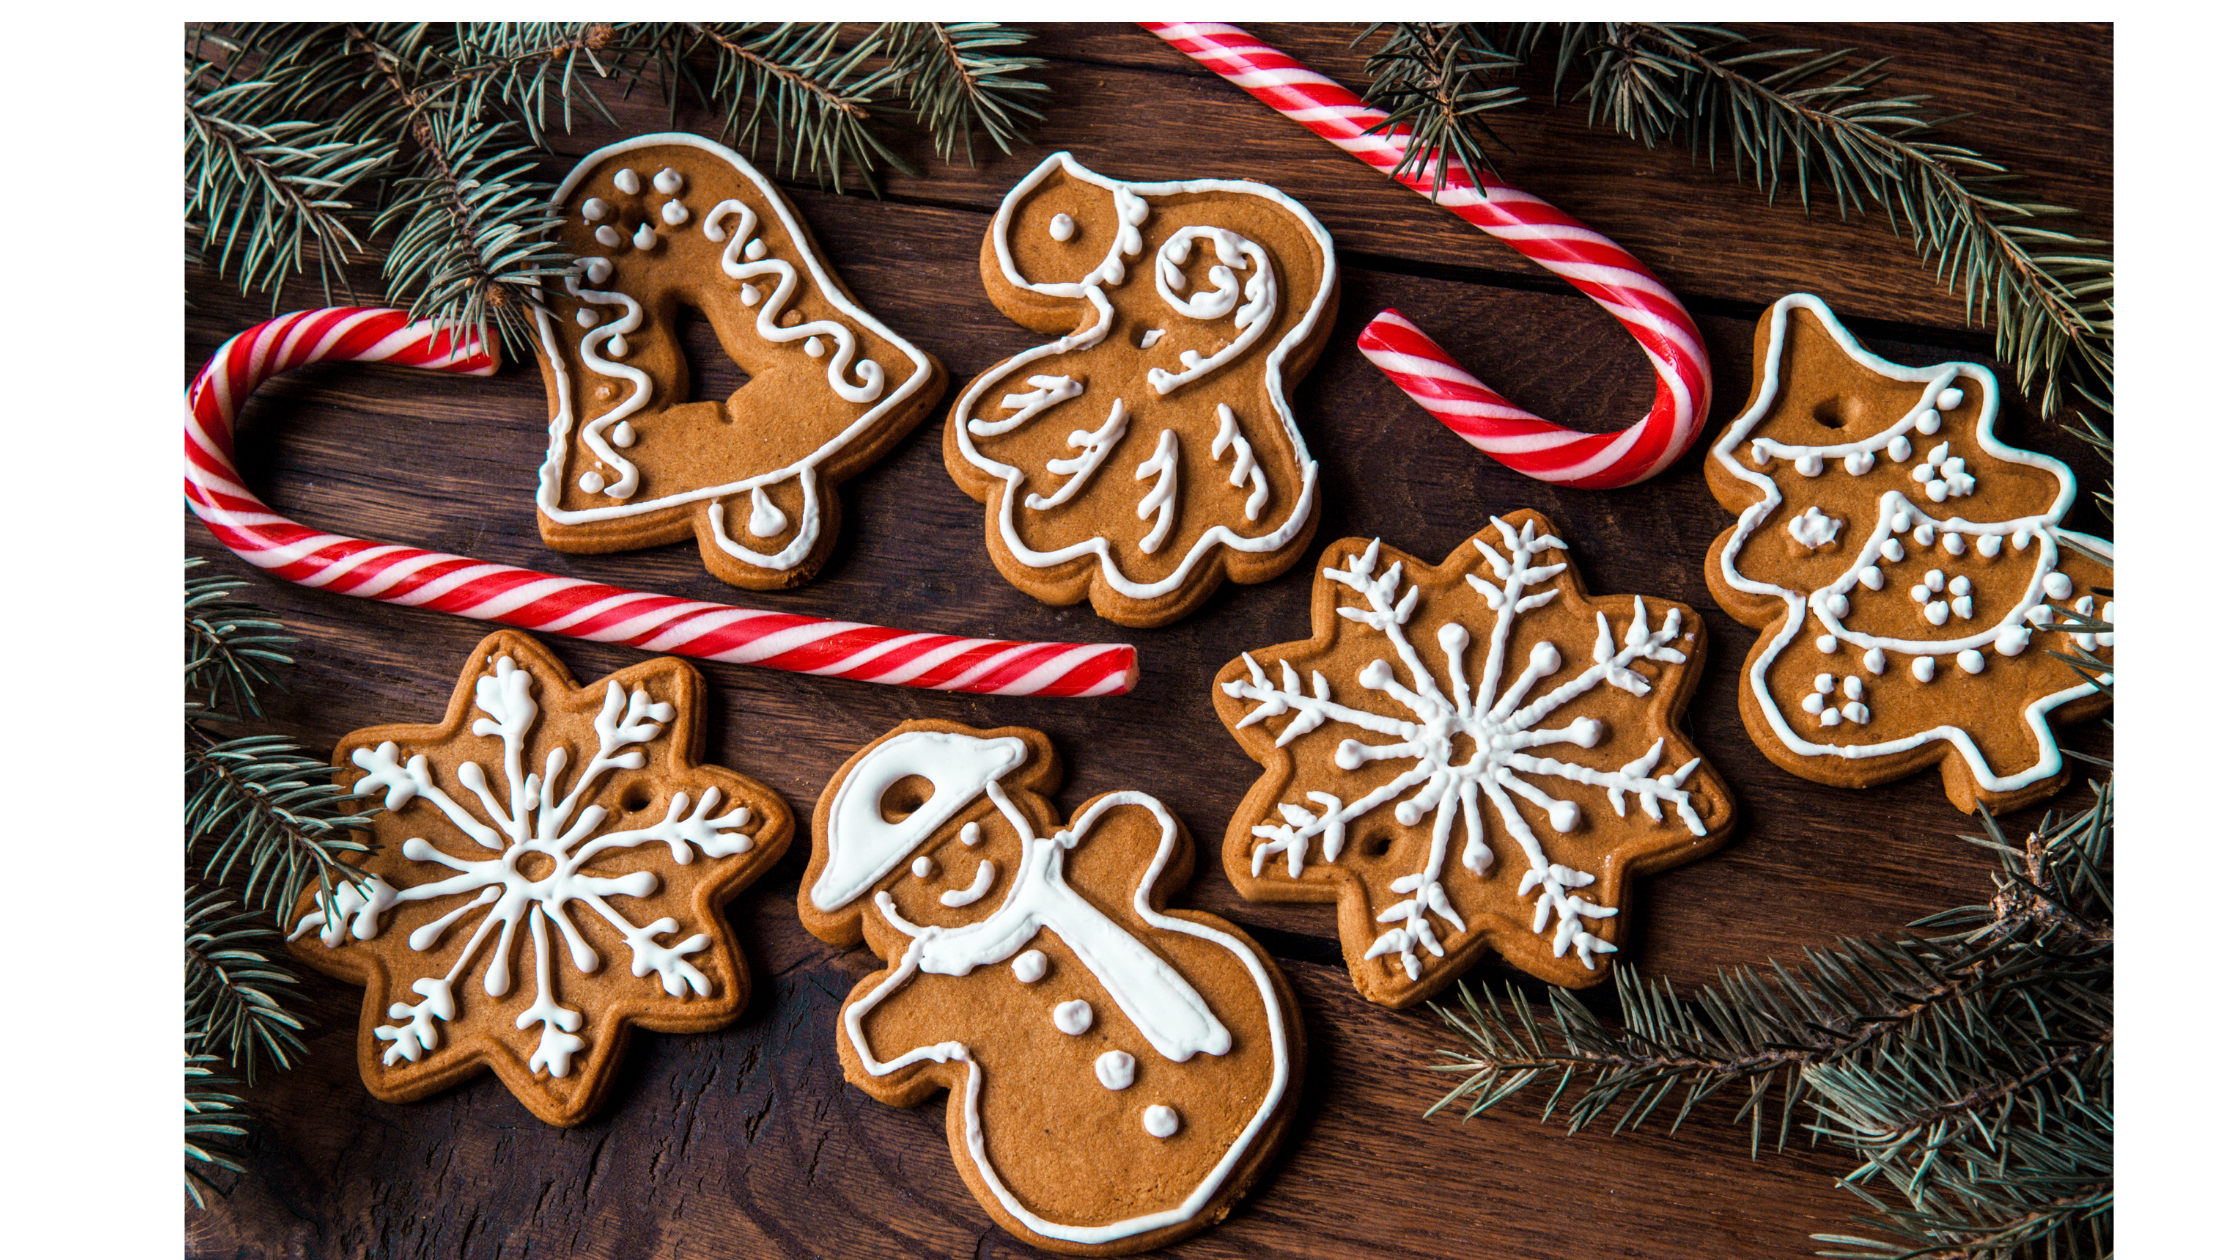 Gingerbread Cookies and Candy Canes